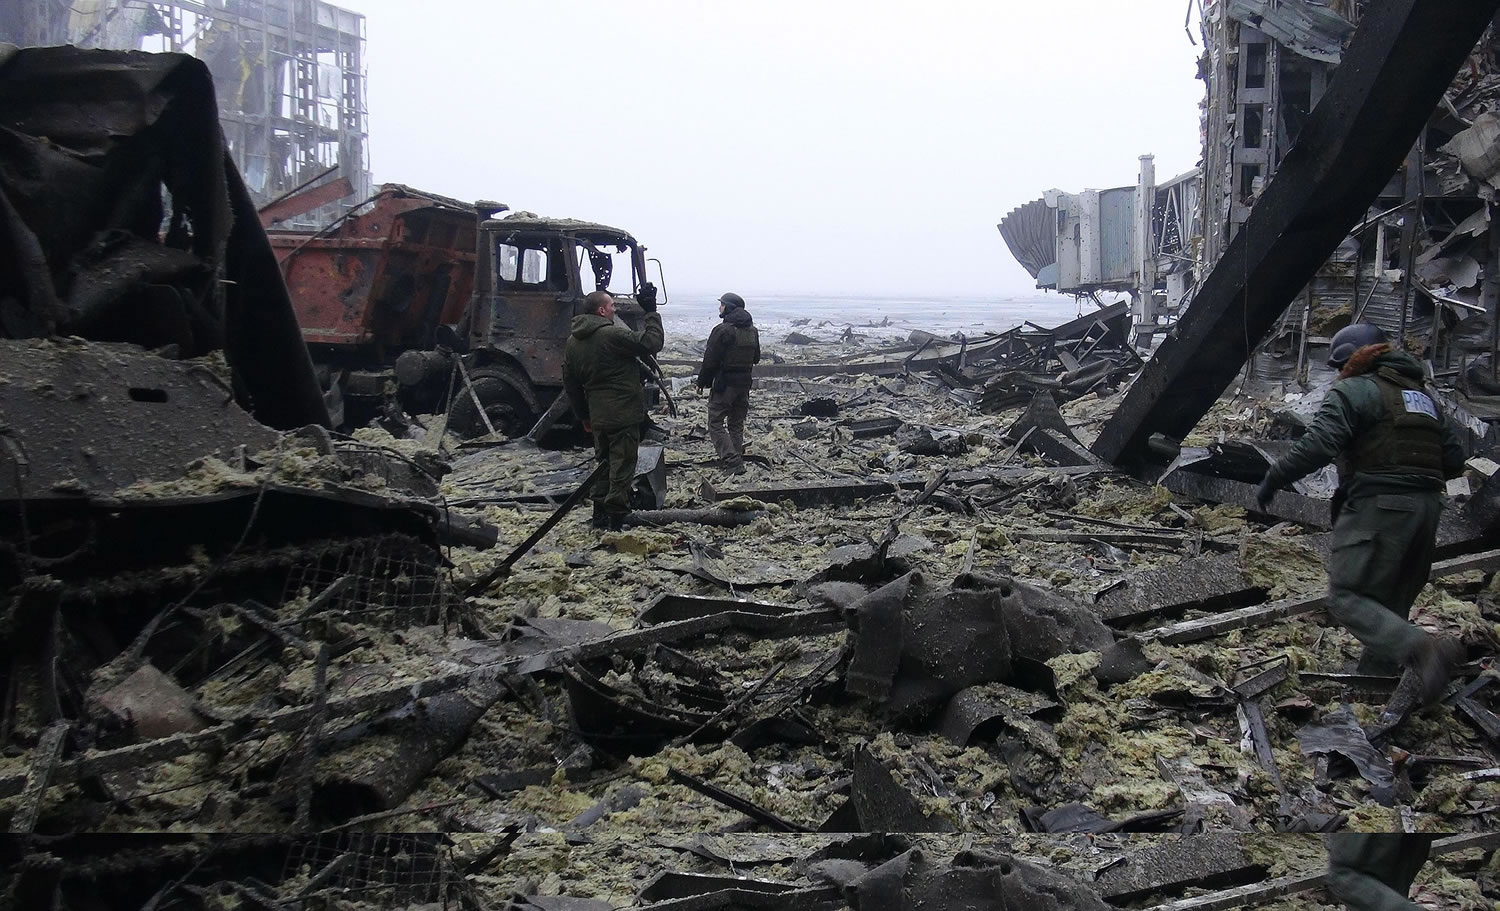 Pro-Russia rebel soldiers clear debris in the destroyed Donetsk Airport on Wednesday in Donetsk, Ukraine.